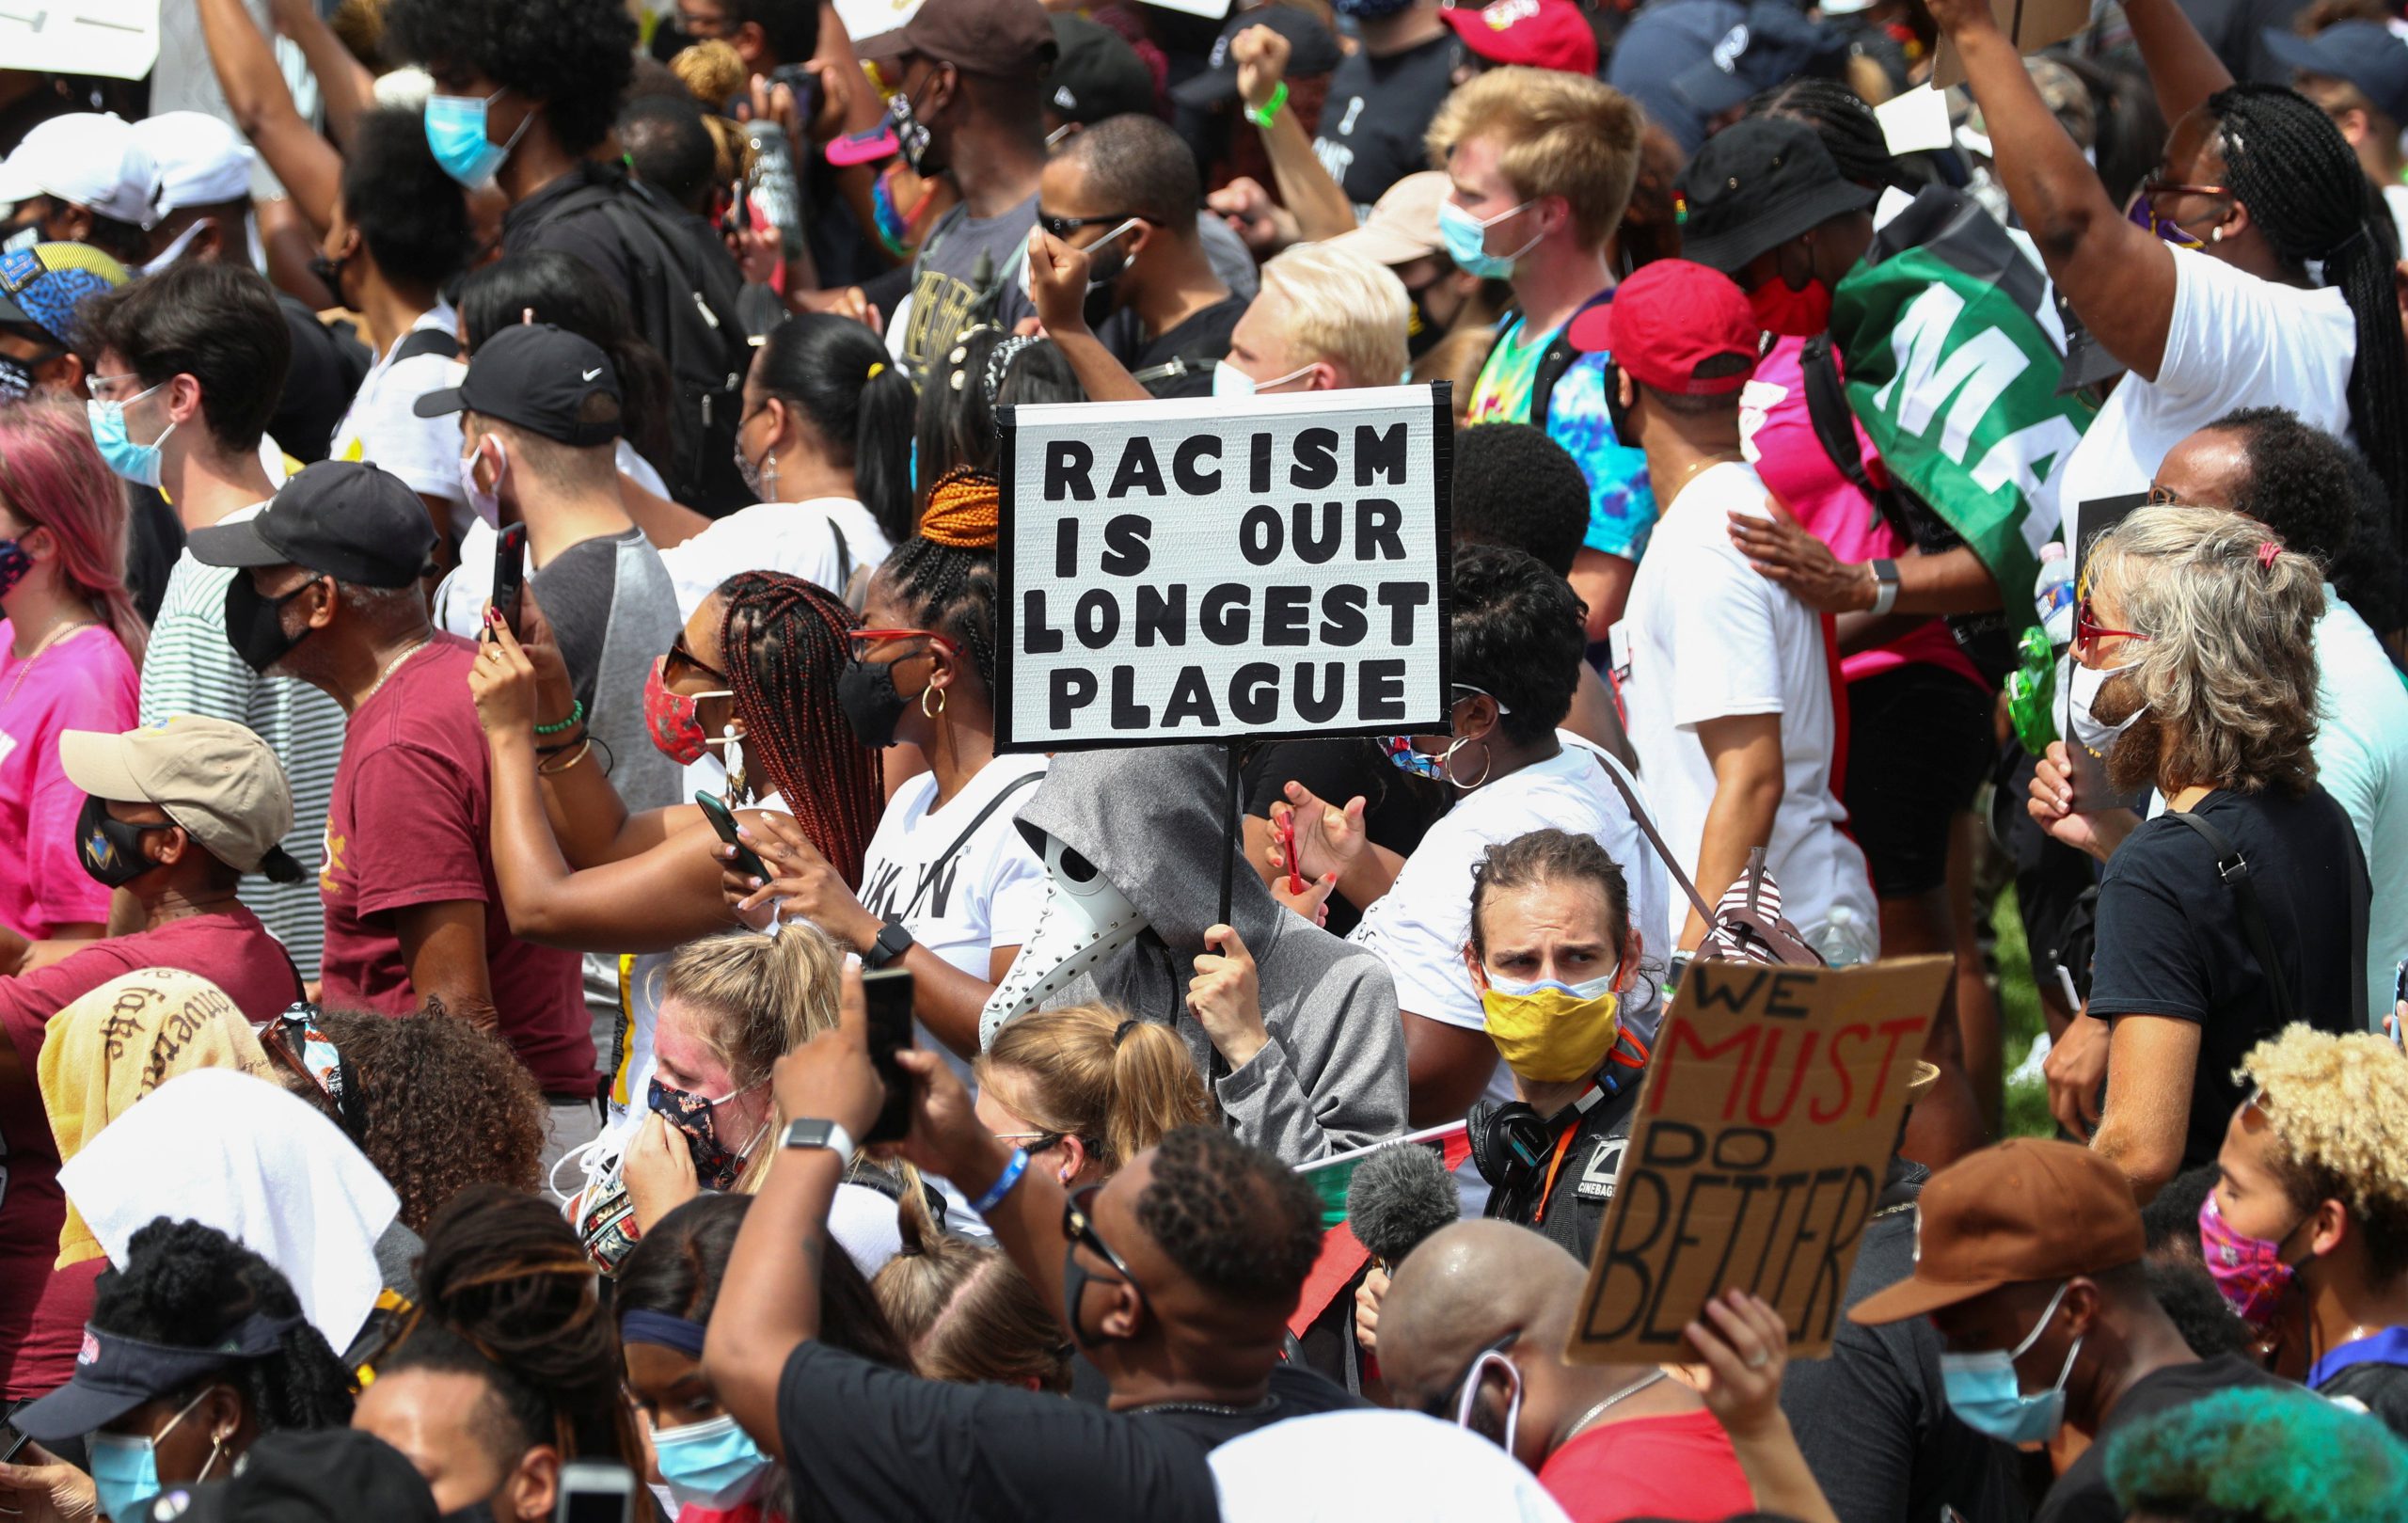 Protesters stand with a sign reading "Racism Is Our Longest Plague" in Washington Aug. 28, 2020, during the "Get Your Knee Off Our Necks" Commitment March on Washington 2020 in support of racial justice. (CNS photo/Tom Brenner, Reuters)